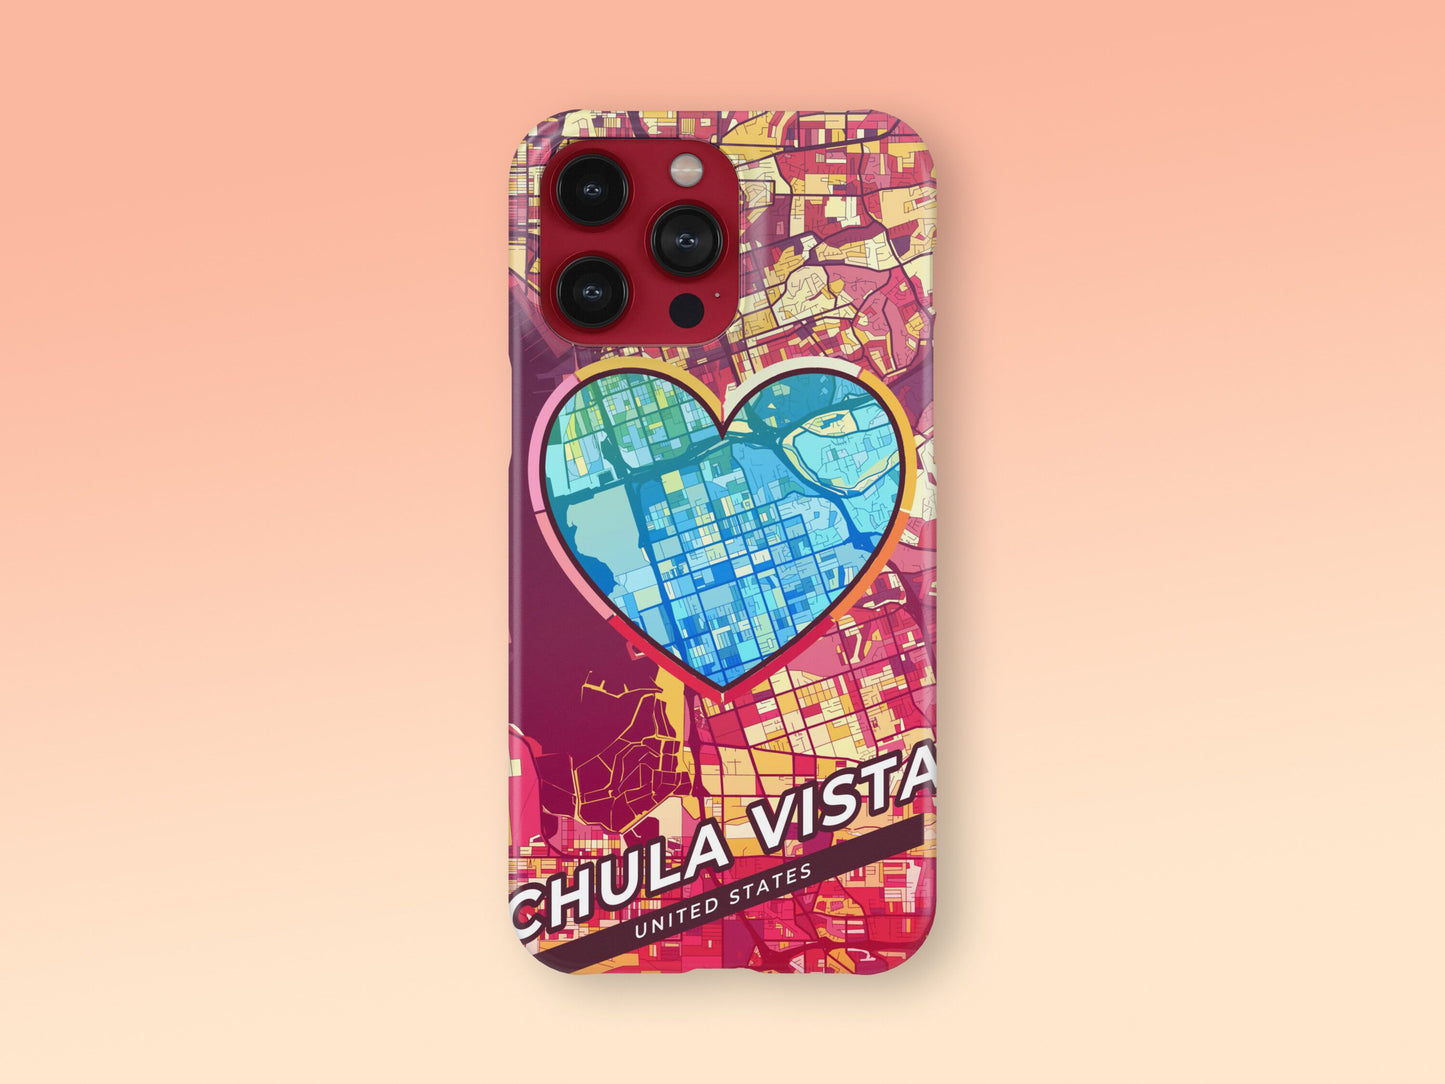 Chula Vista California slim phone case with colorful icon. Birthday, wedding or housewarming gift. Couple match cases. 2